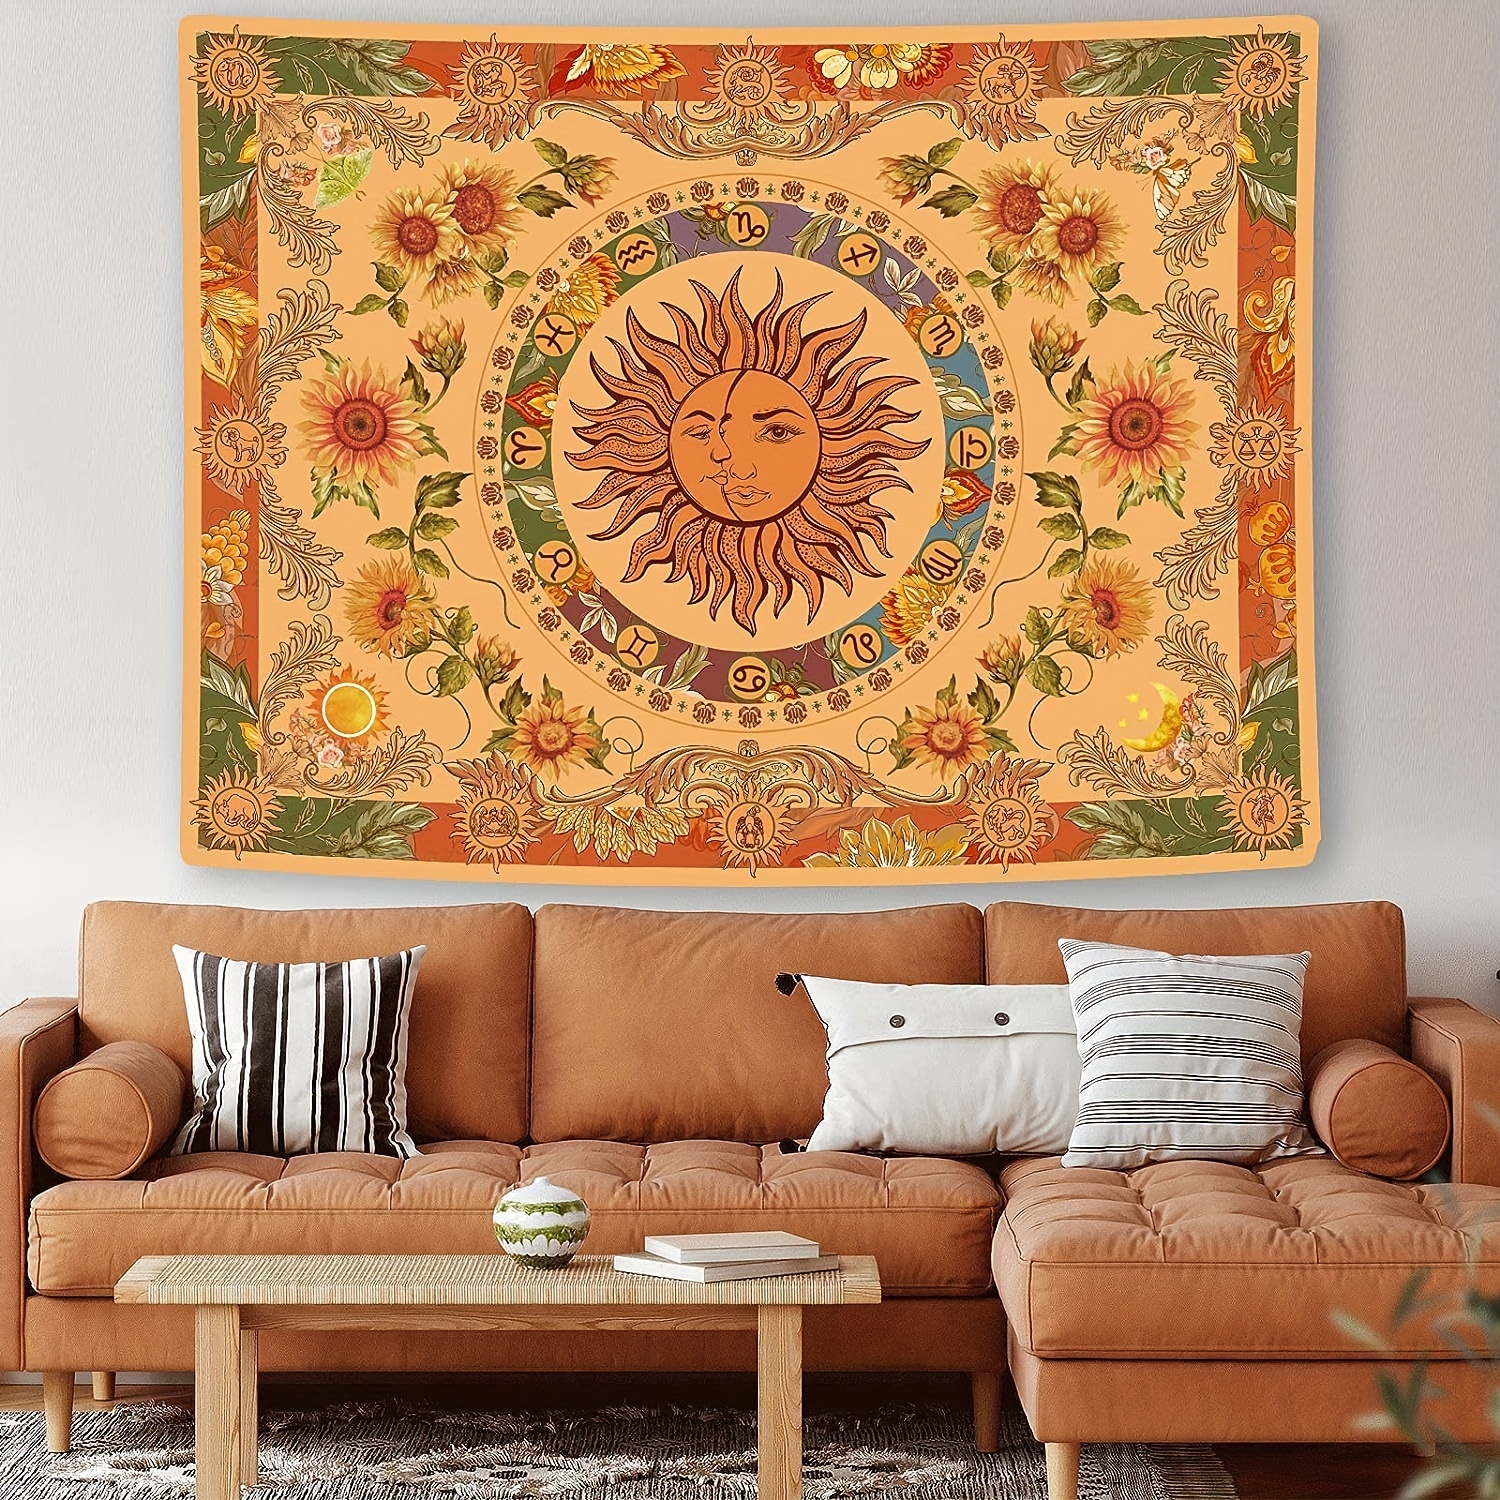 Sun Print Tapestry Wall Hanging Family Bedroom Decorated With